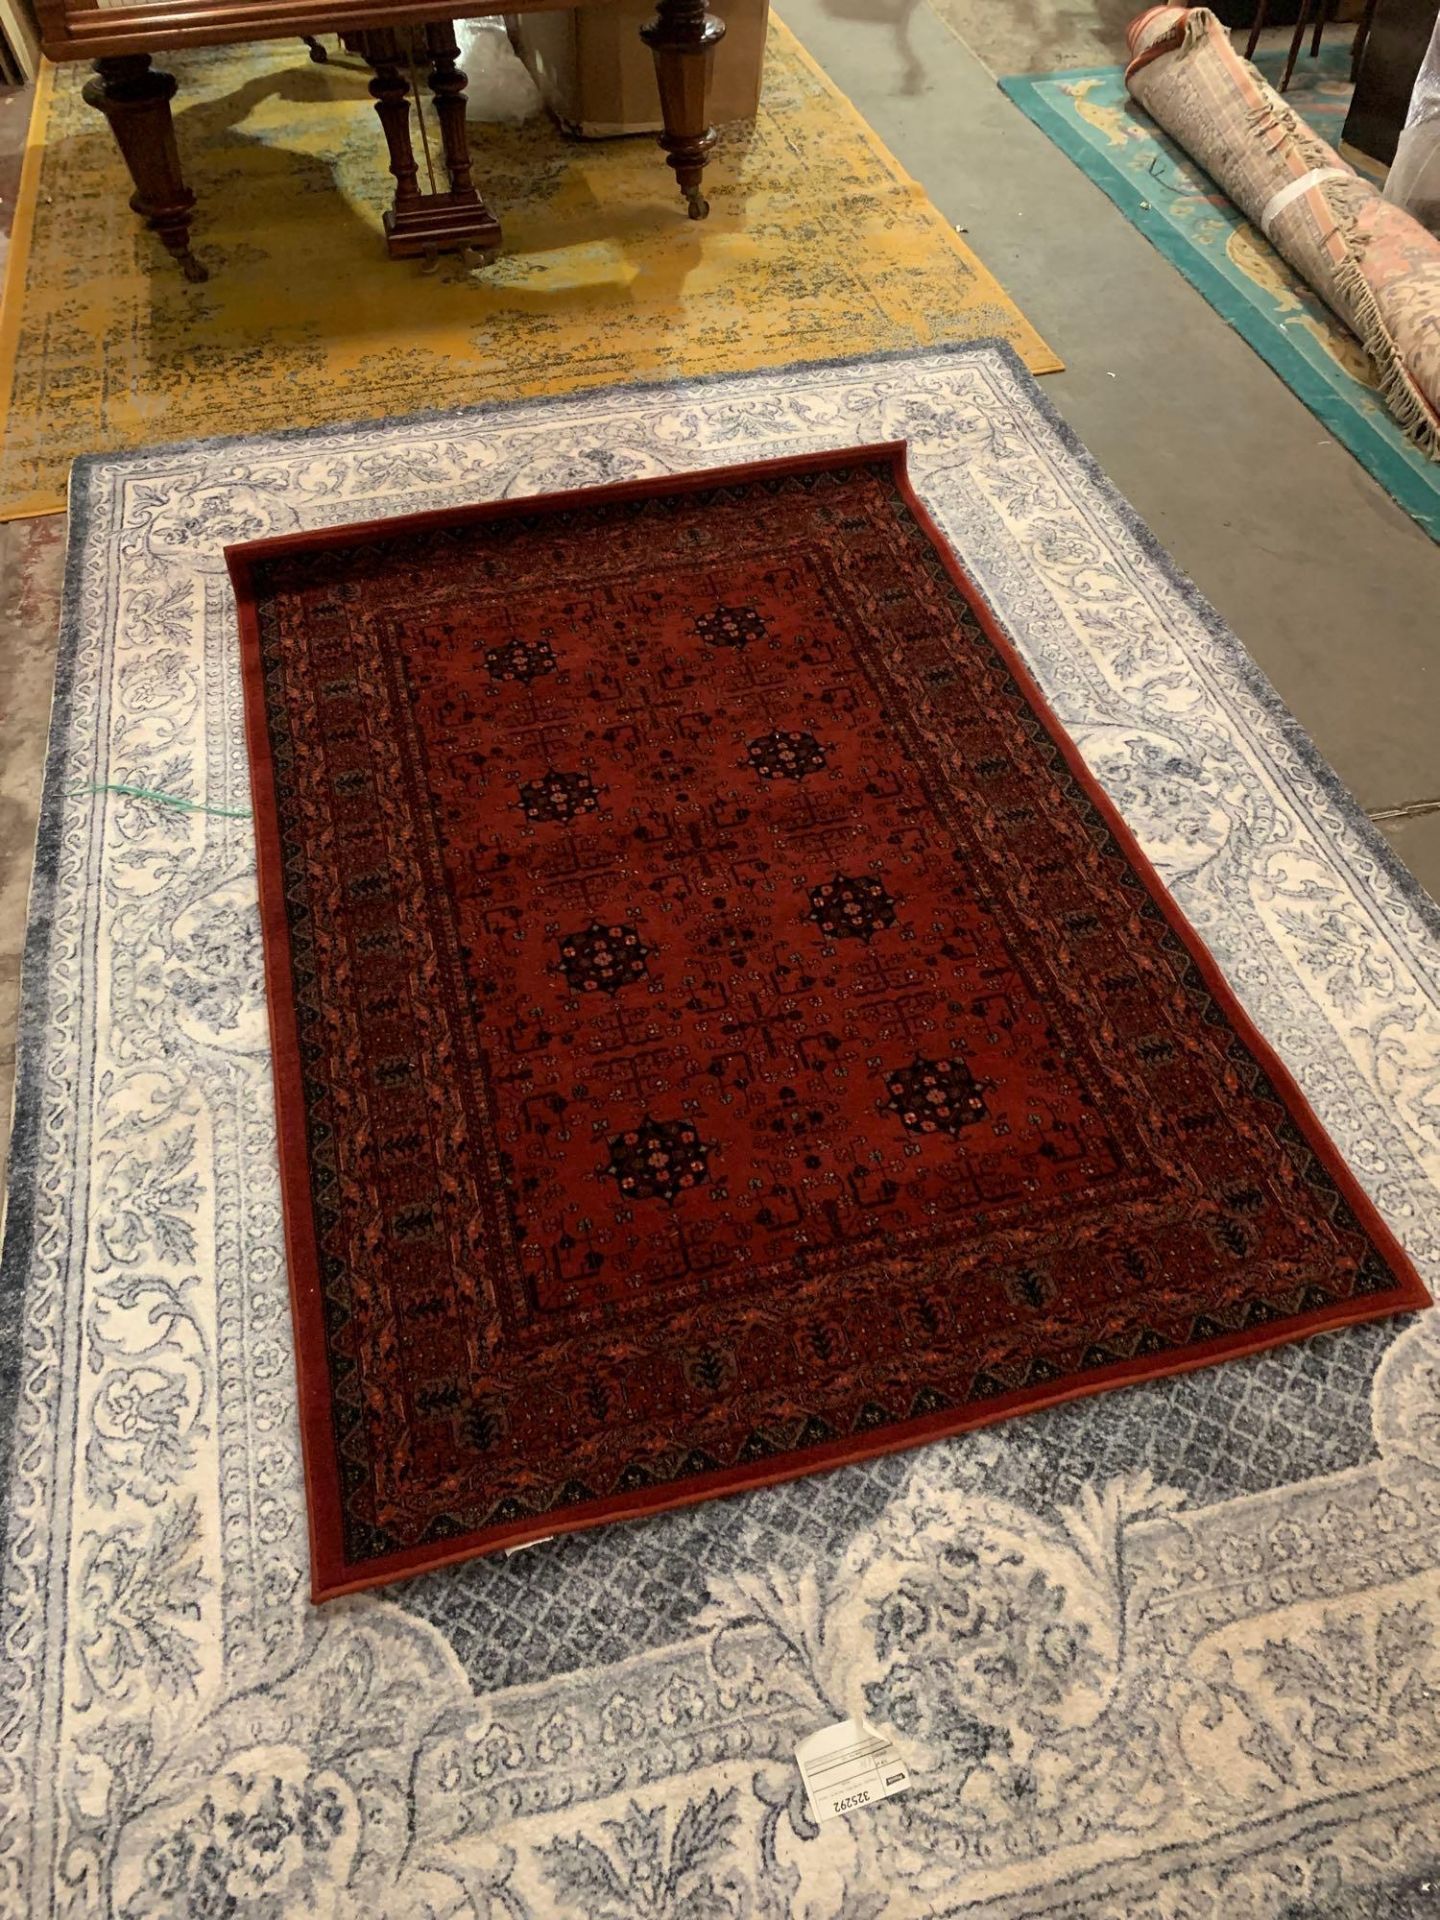 Afghan Rug, Herat, West Afghanistan, Wool On Wool Foundation. The Chestnut Red Field With Two